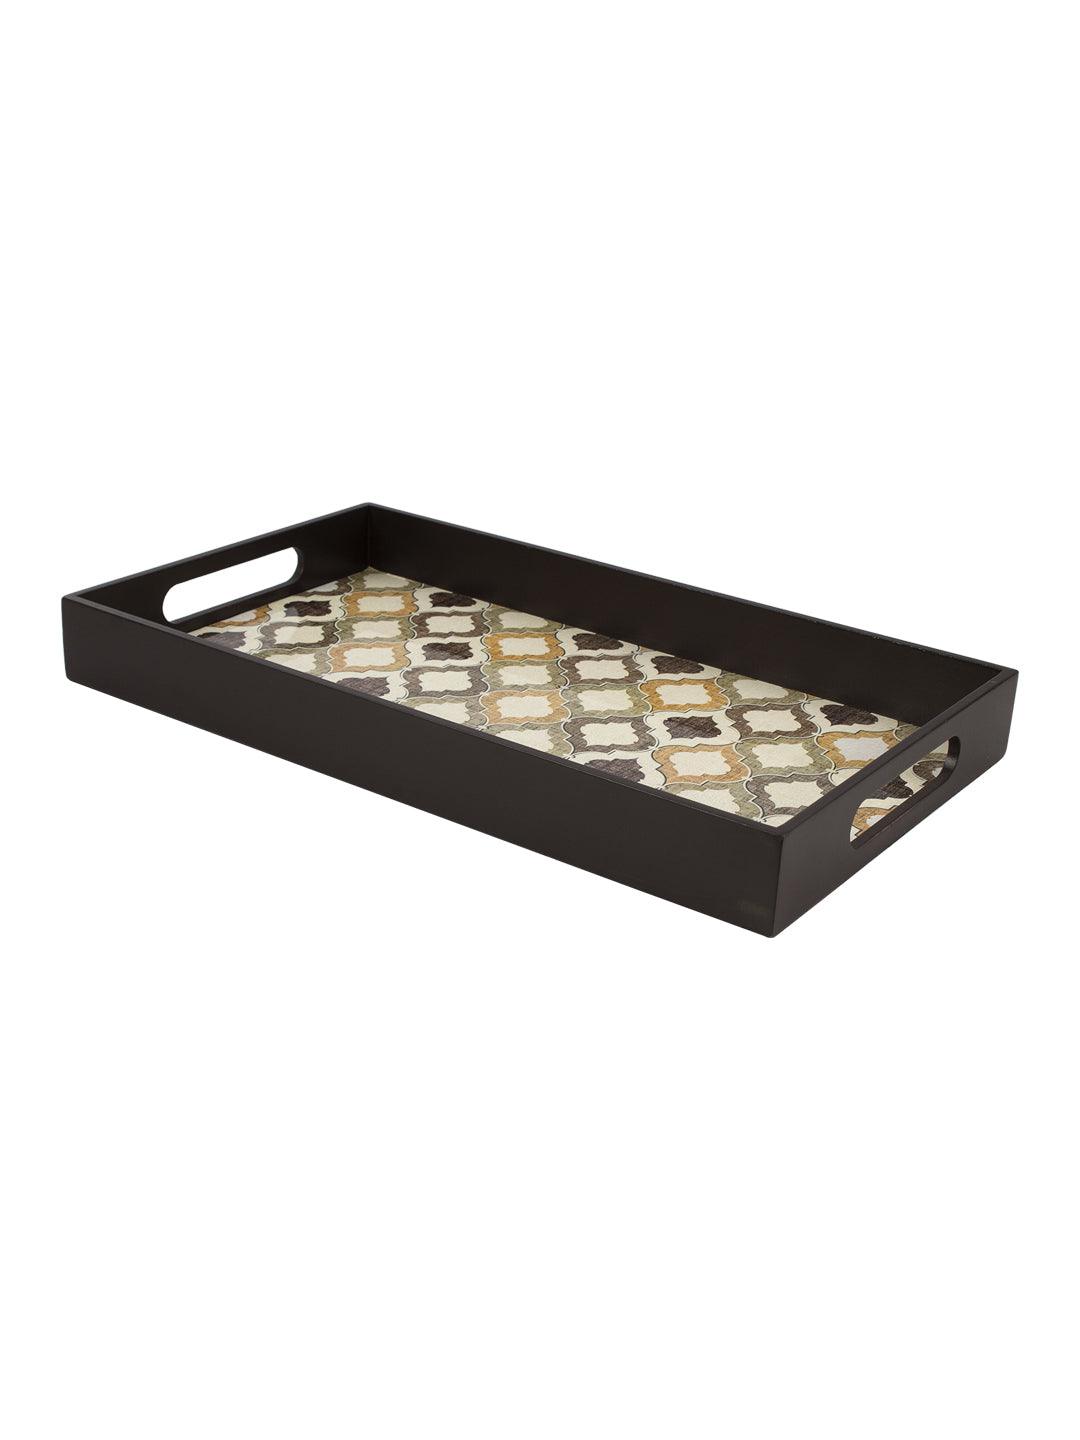 Brown Rectangular Tray with handle - Market 99 - MARKET 99